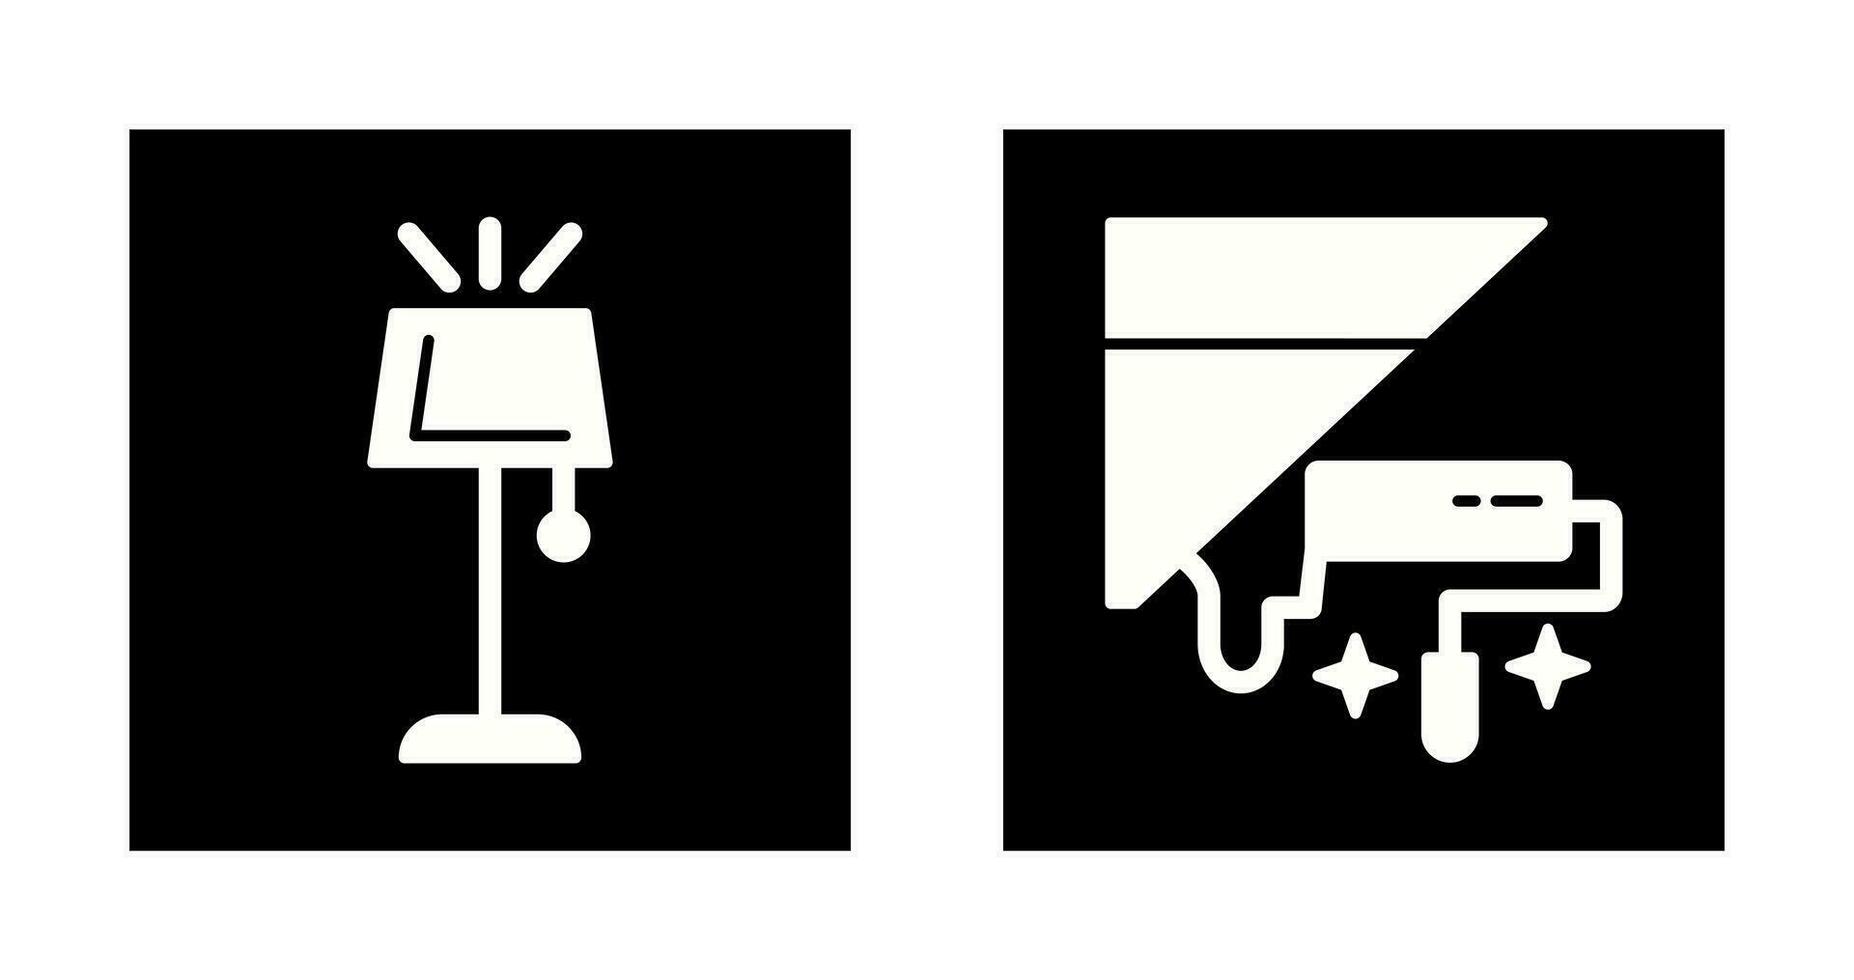 Lamp and Paint Icon vector